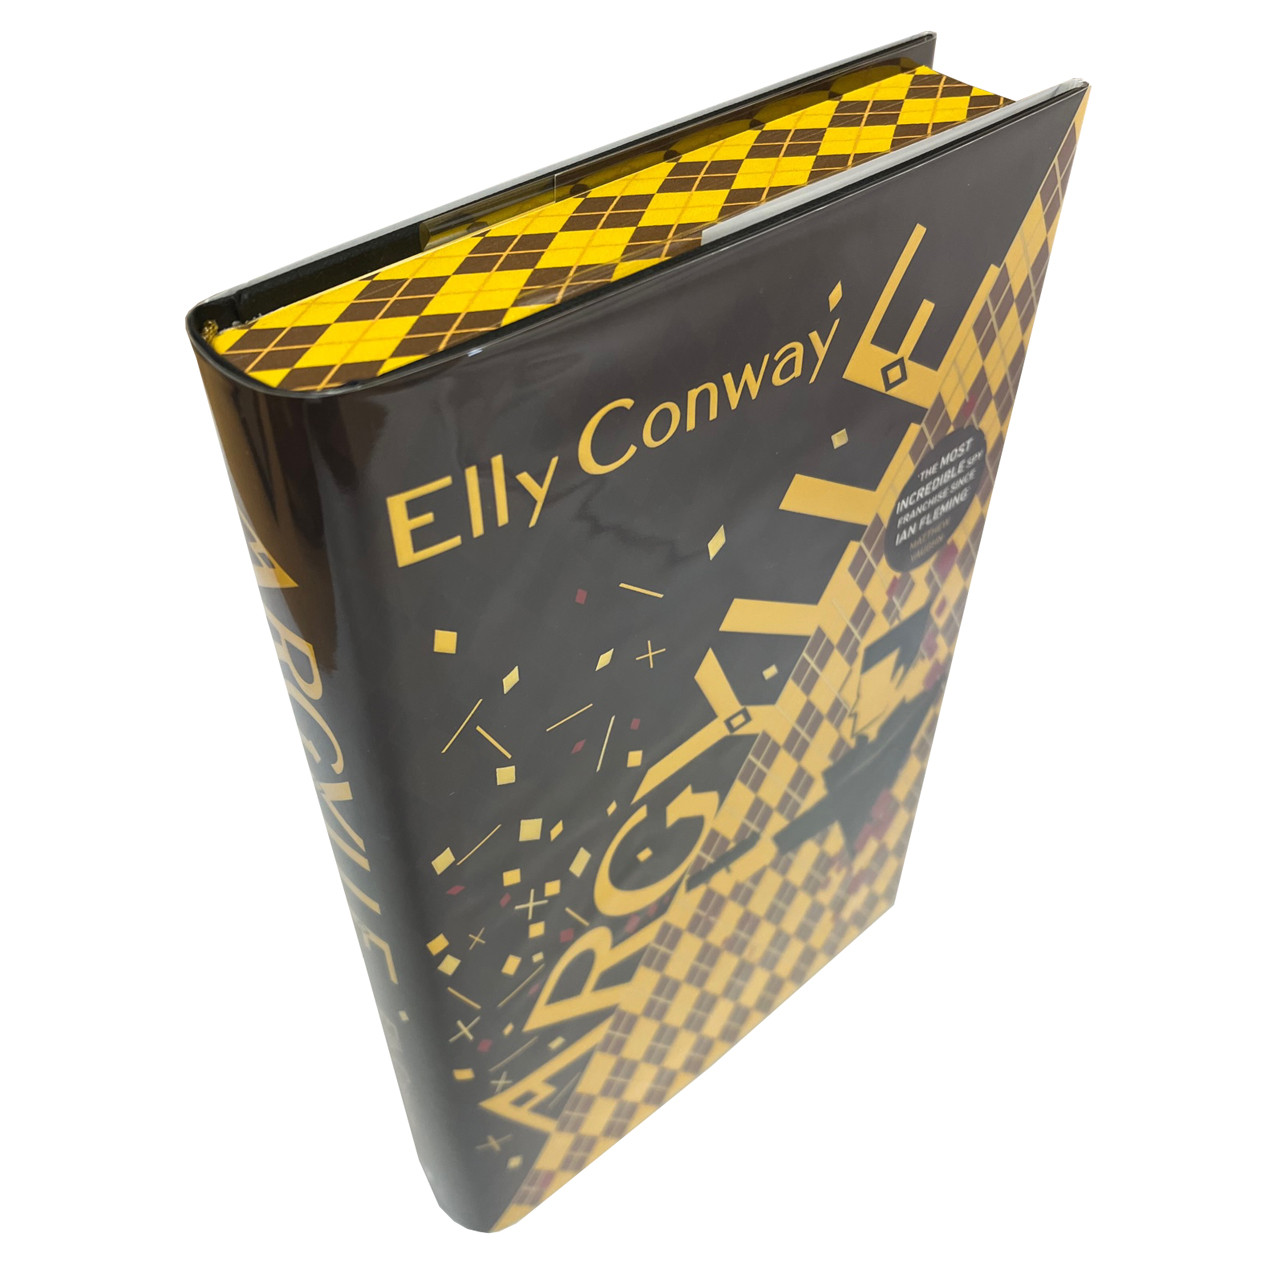 Elly Conway "Argylle" UK Signed First Edition,  Slipcased Signed Limited Edition of 500 w/COA [Very Fine/Sealed]